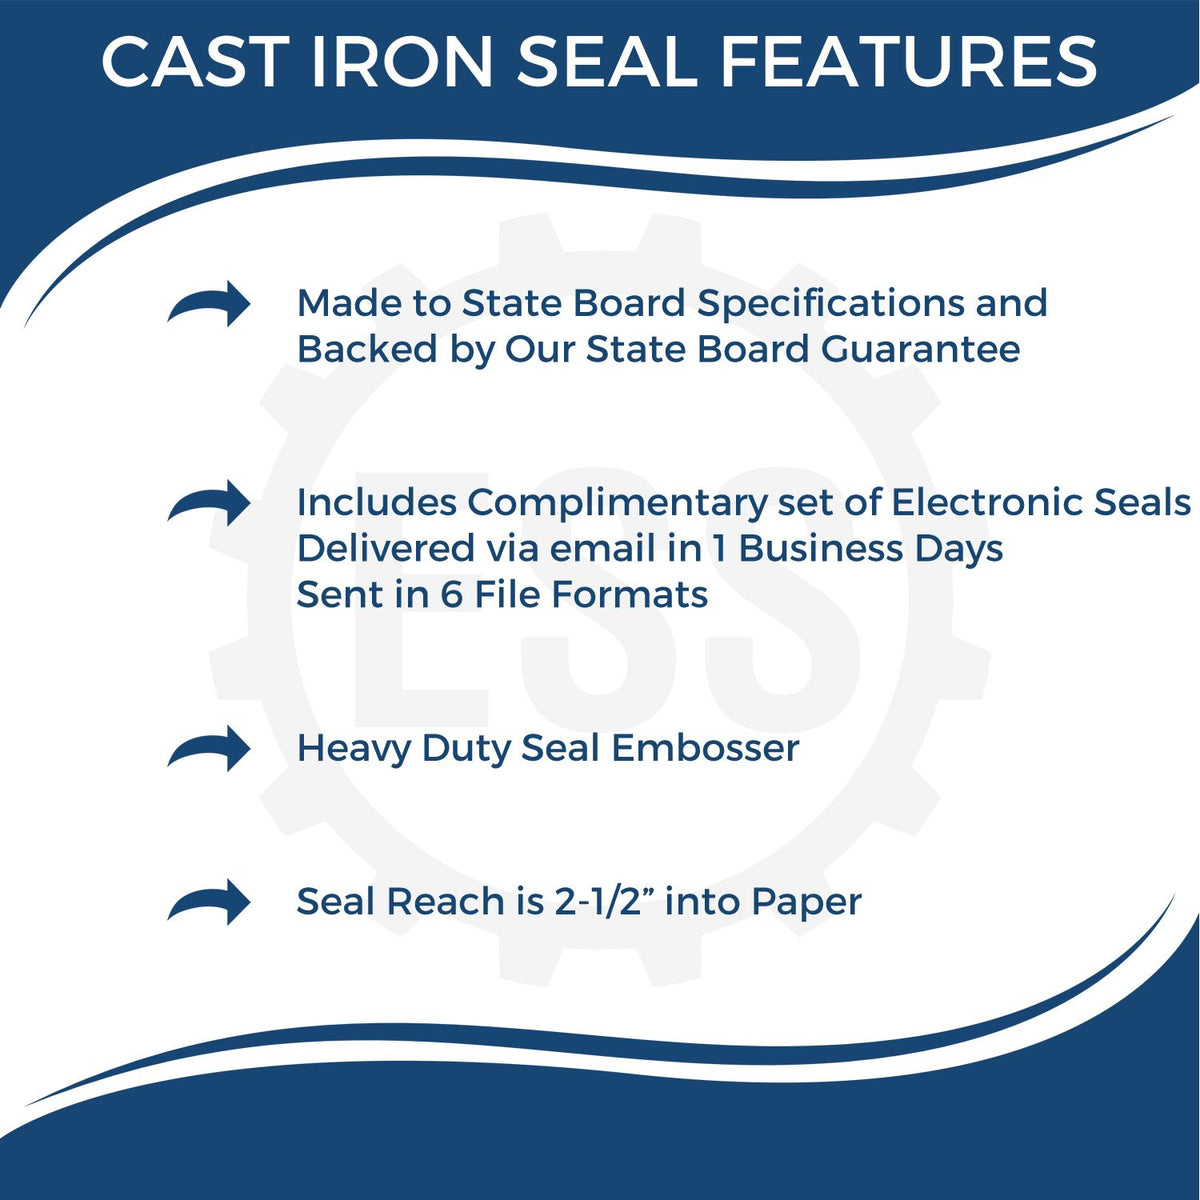 A picture of an infographic highlighting the selling points for the Heavy Duty Cast Iron Montana Geologist Seal Embosser